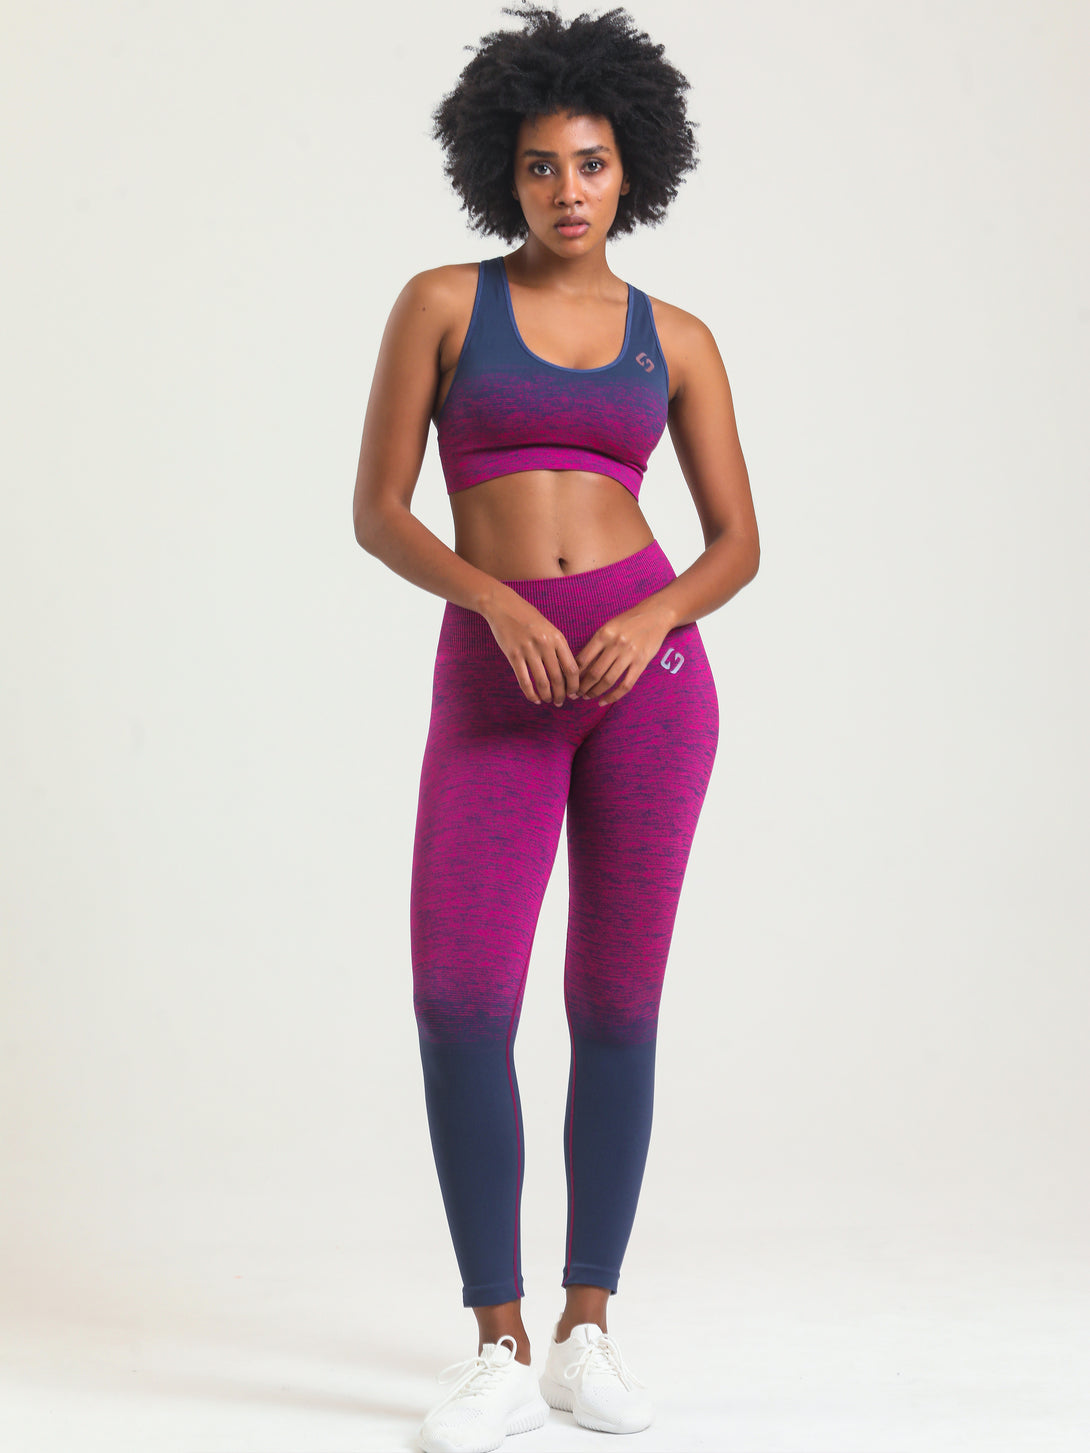 A woman wearing Beetroot Purple color Seamless Ombre Medium Support Sports Bra